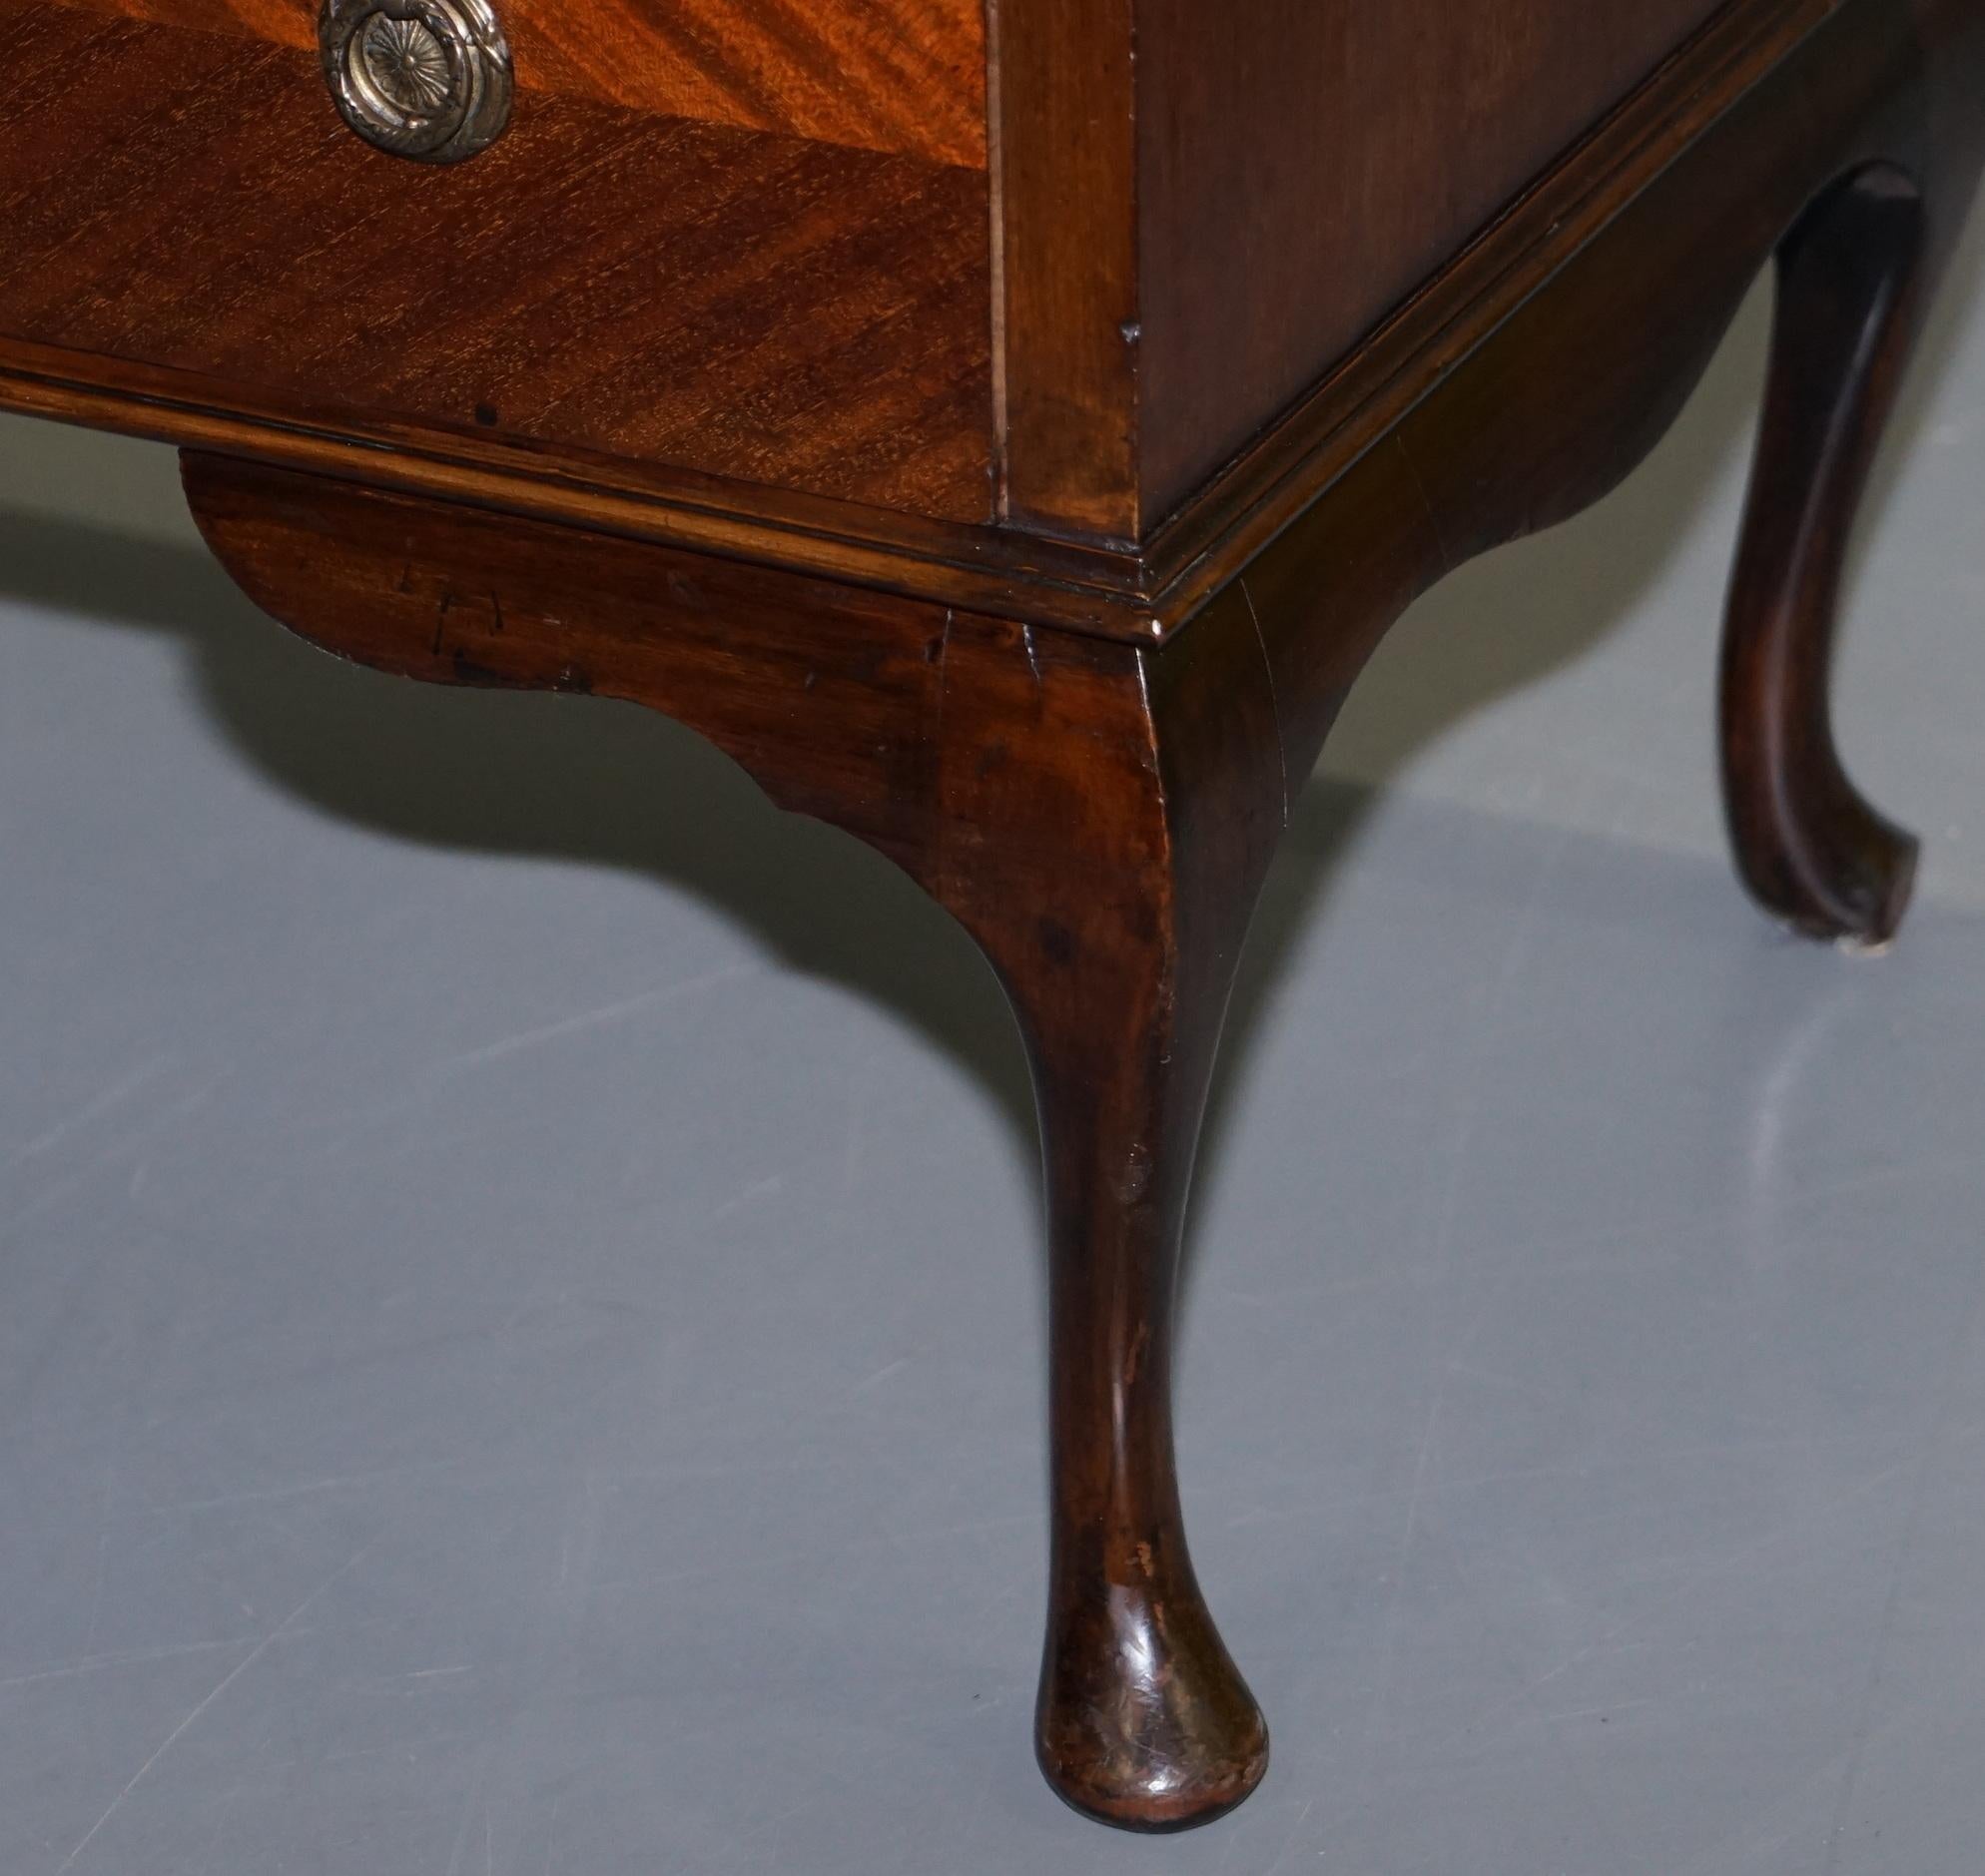 Hand-Crafted Stunning 1900 Hardwood Chippendale Drop Front Bureau Desk Lovely Timber Patina